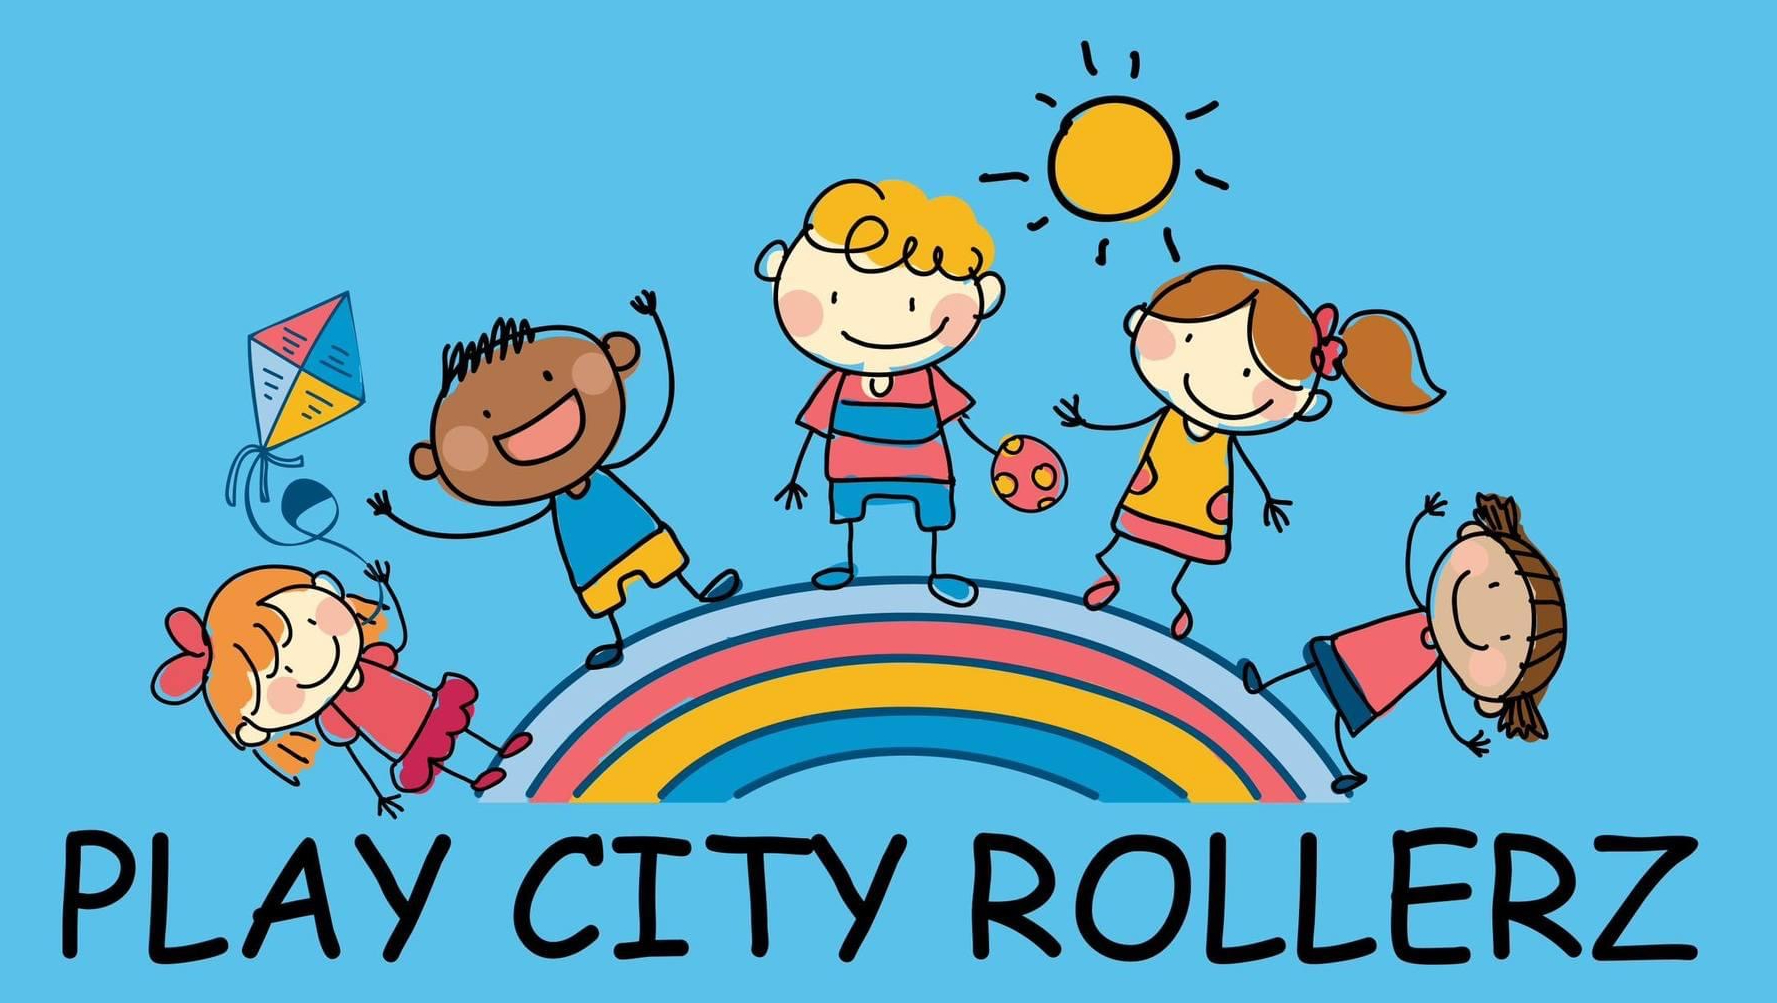 PLAY CITY ROLLERZ - PLAYGROUP IN MARLOW